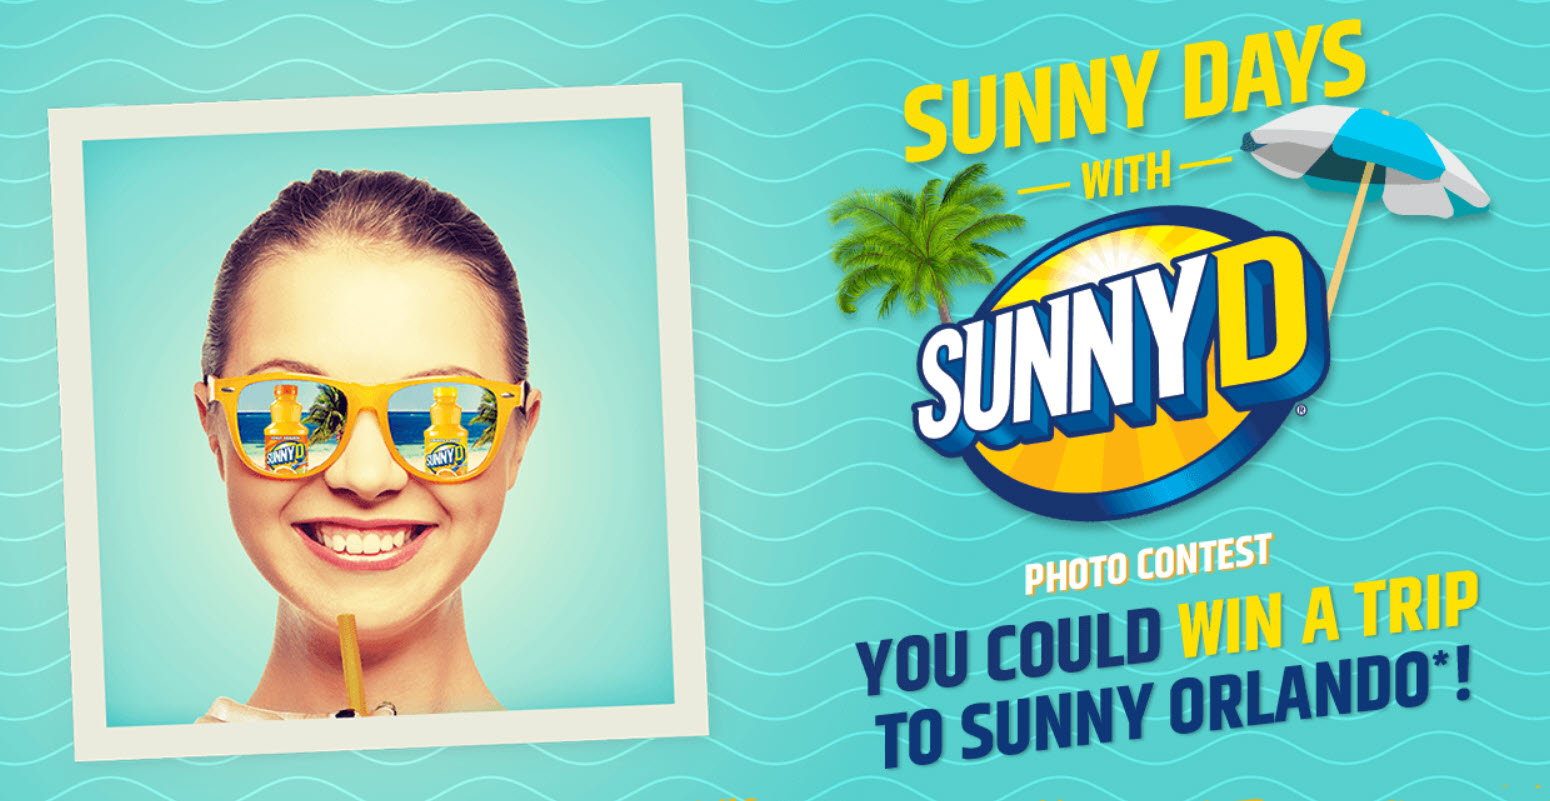 Enter for the chance to win a trip to Orlando Florida from SunnyD.